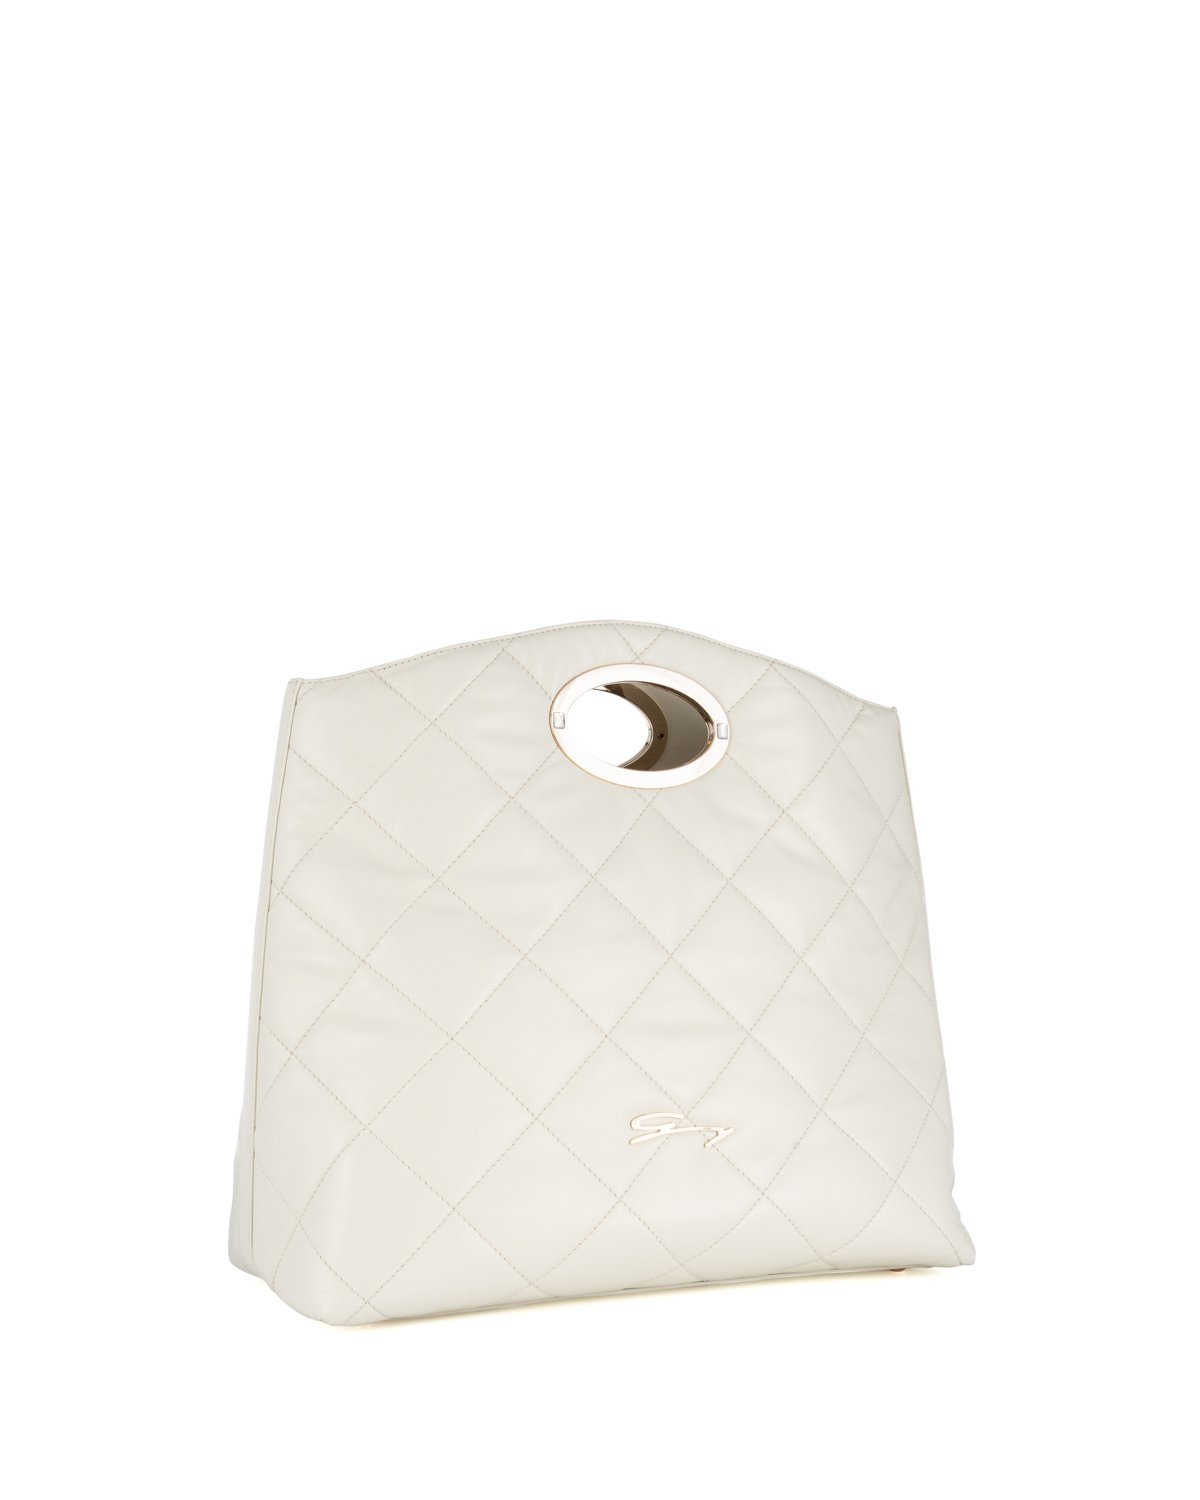 Sara quilted white leather bag | Accessories | Genny